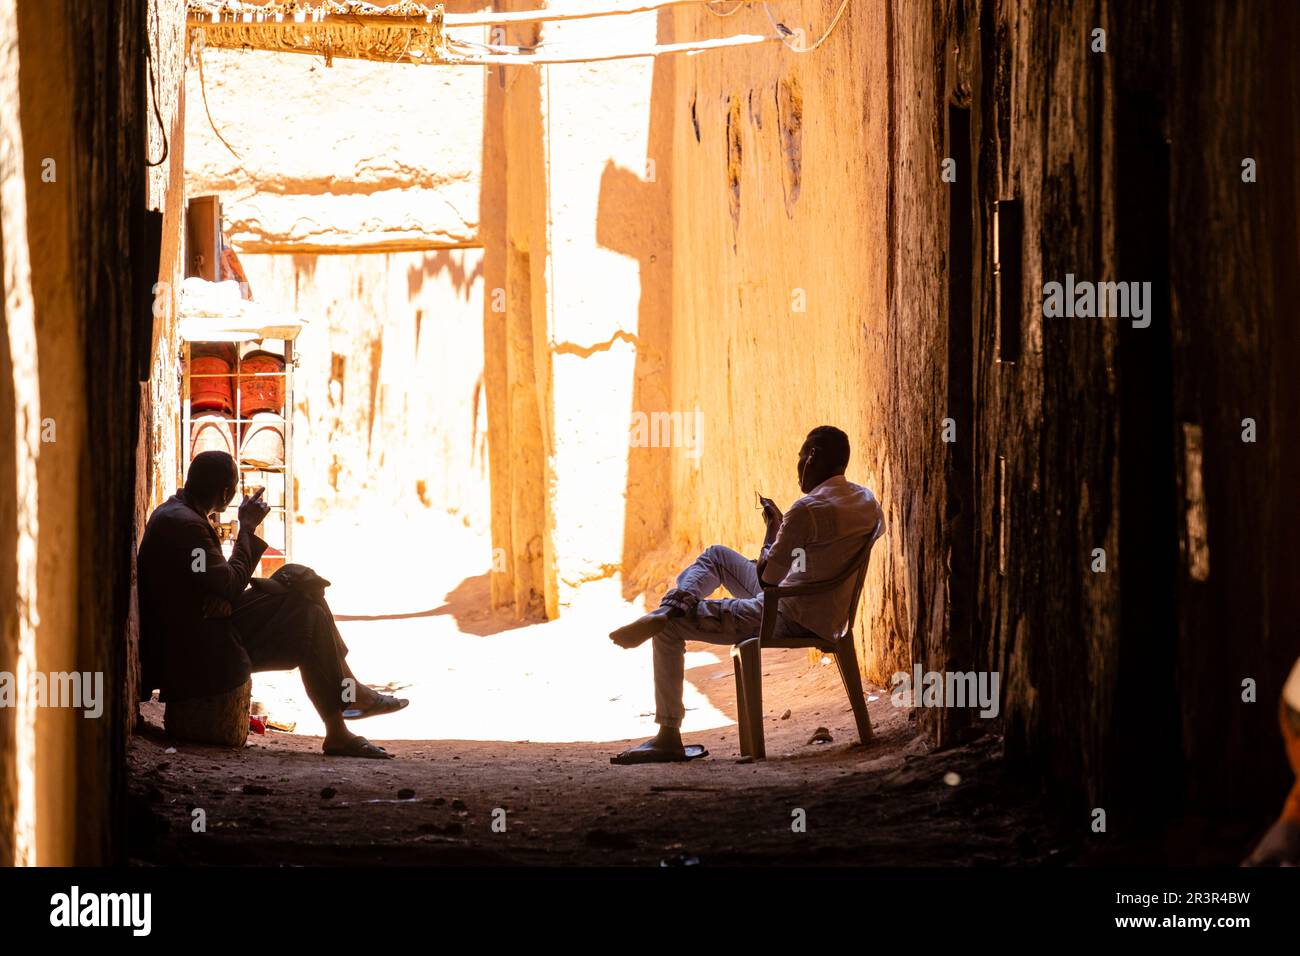 two men in the shade, ksar of Tamegroute, Draa Valley, Morocco, Africa. Stock Photo